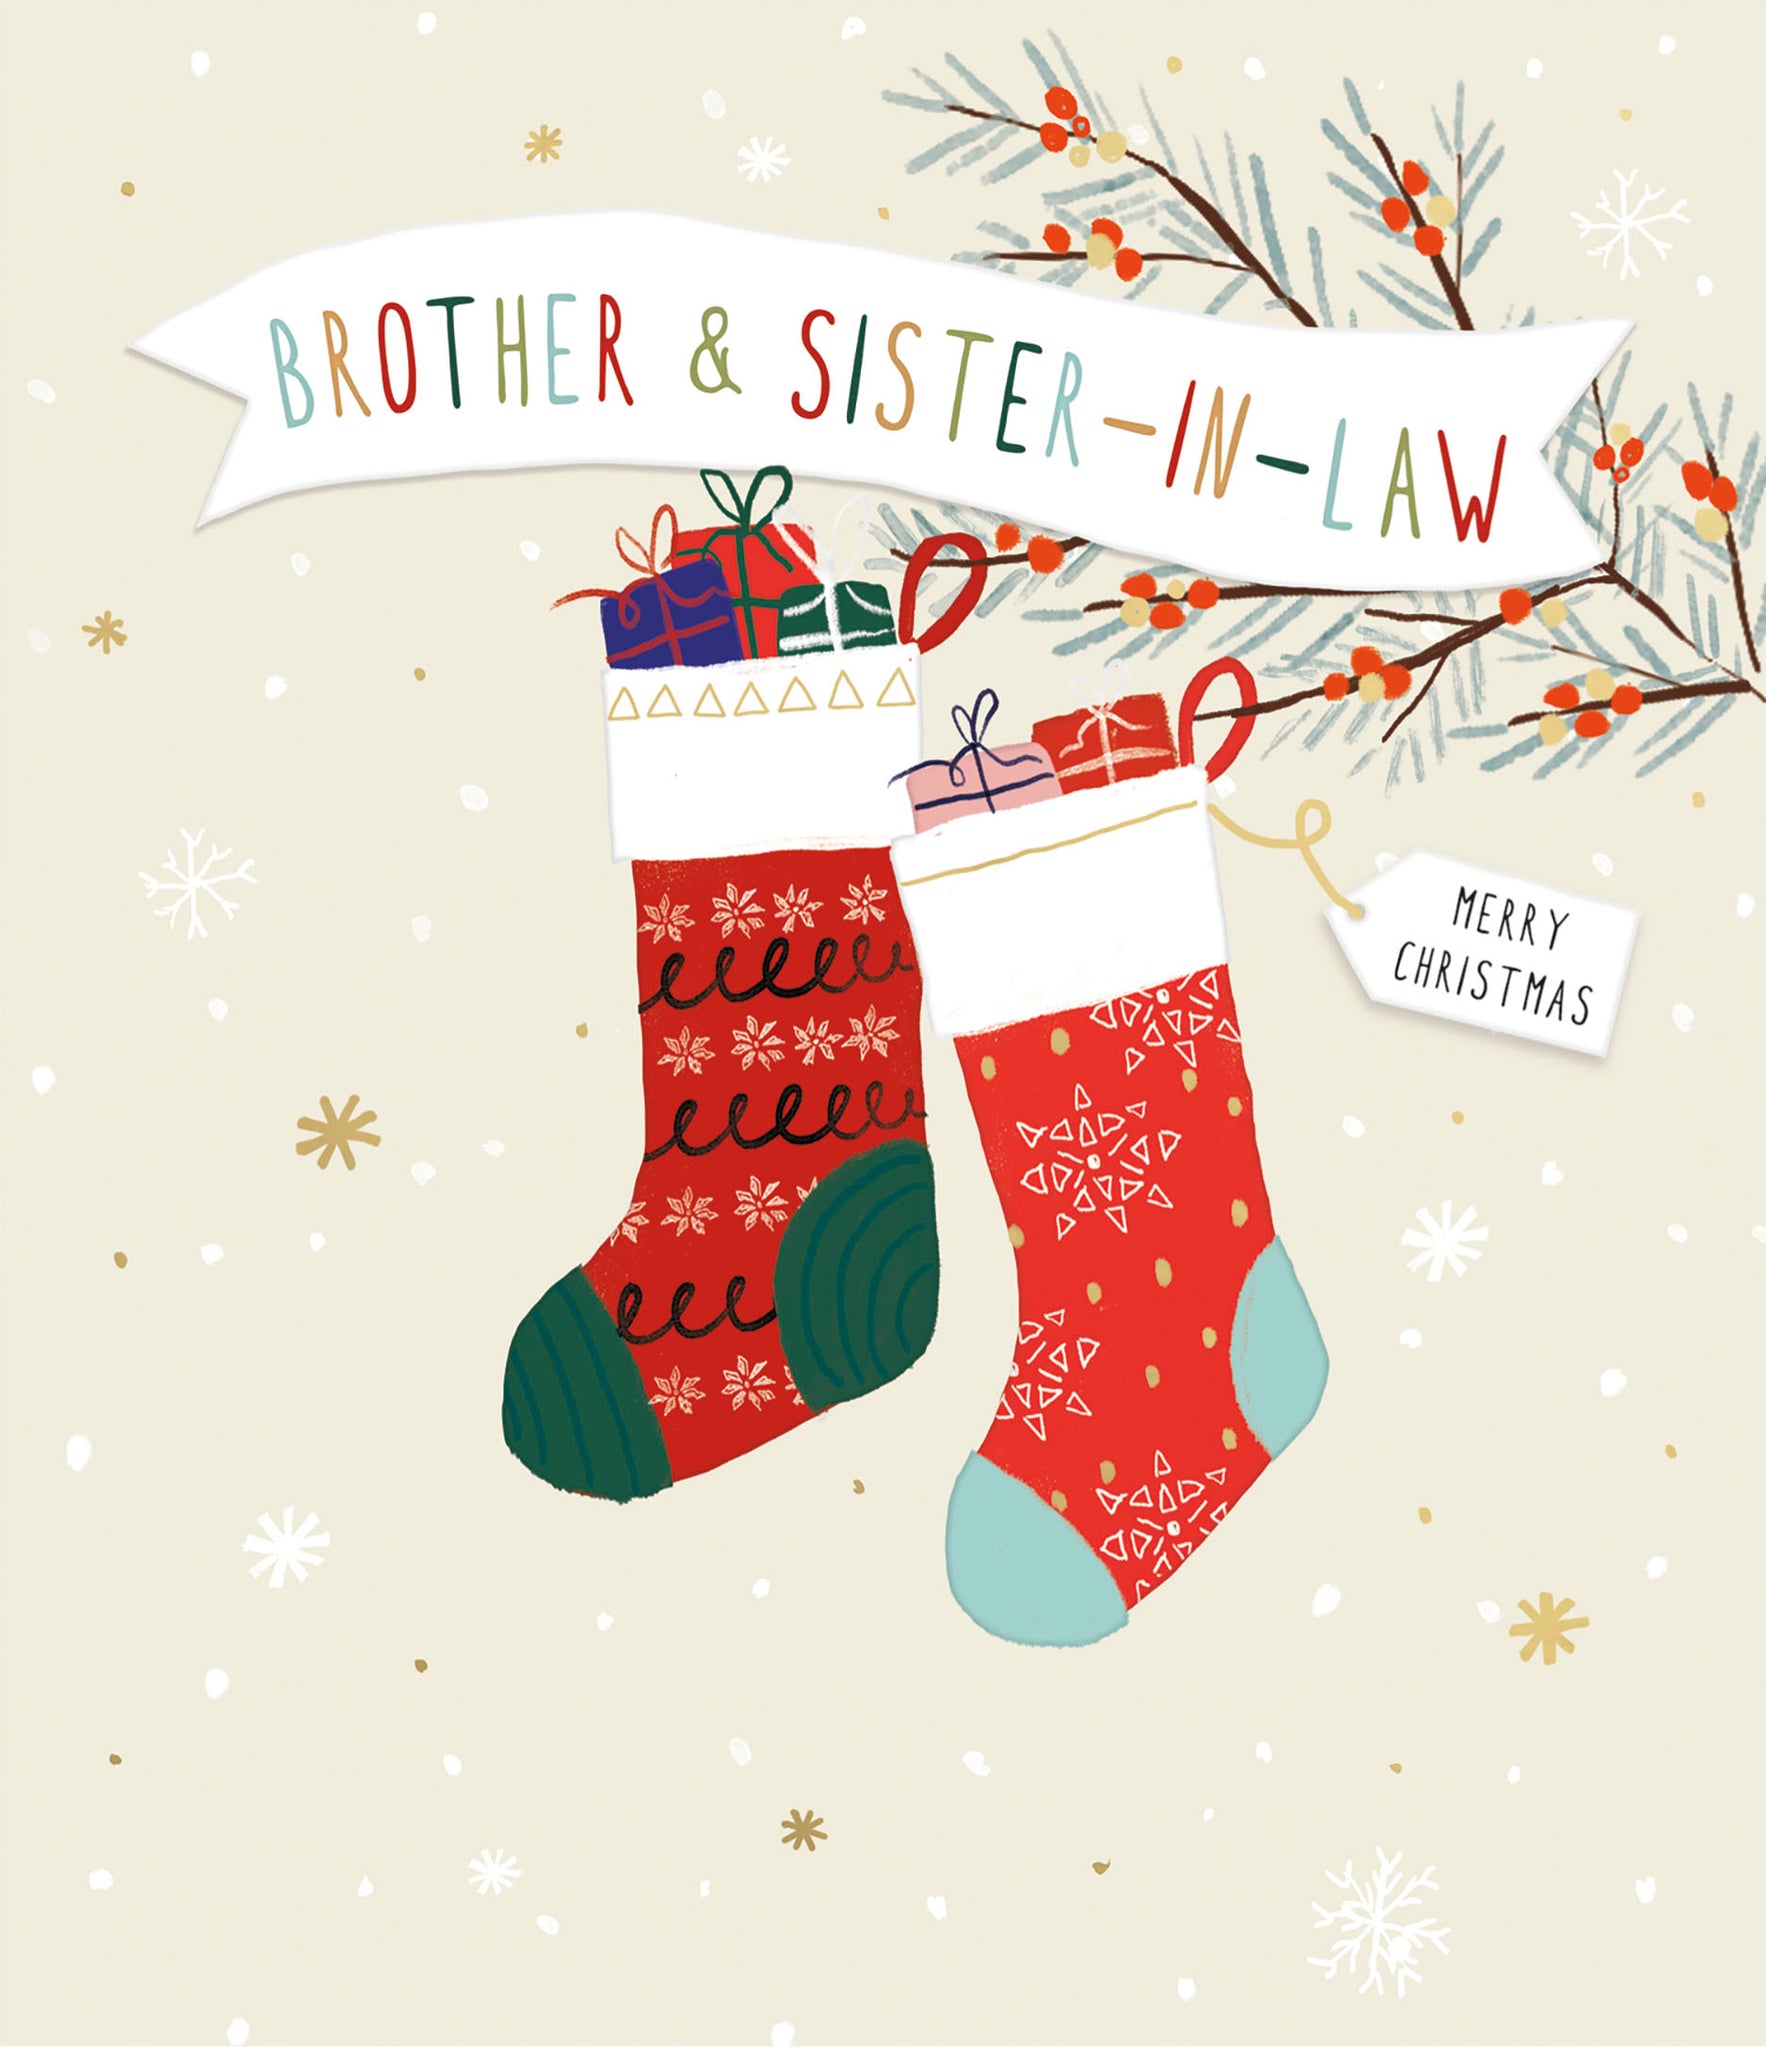 Brother and Sister in law Christmas card - festive stockings